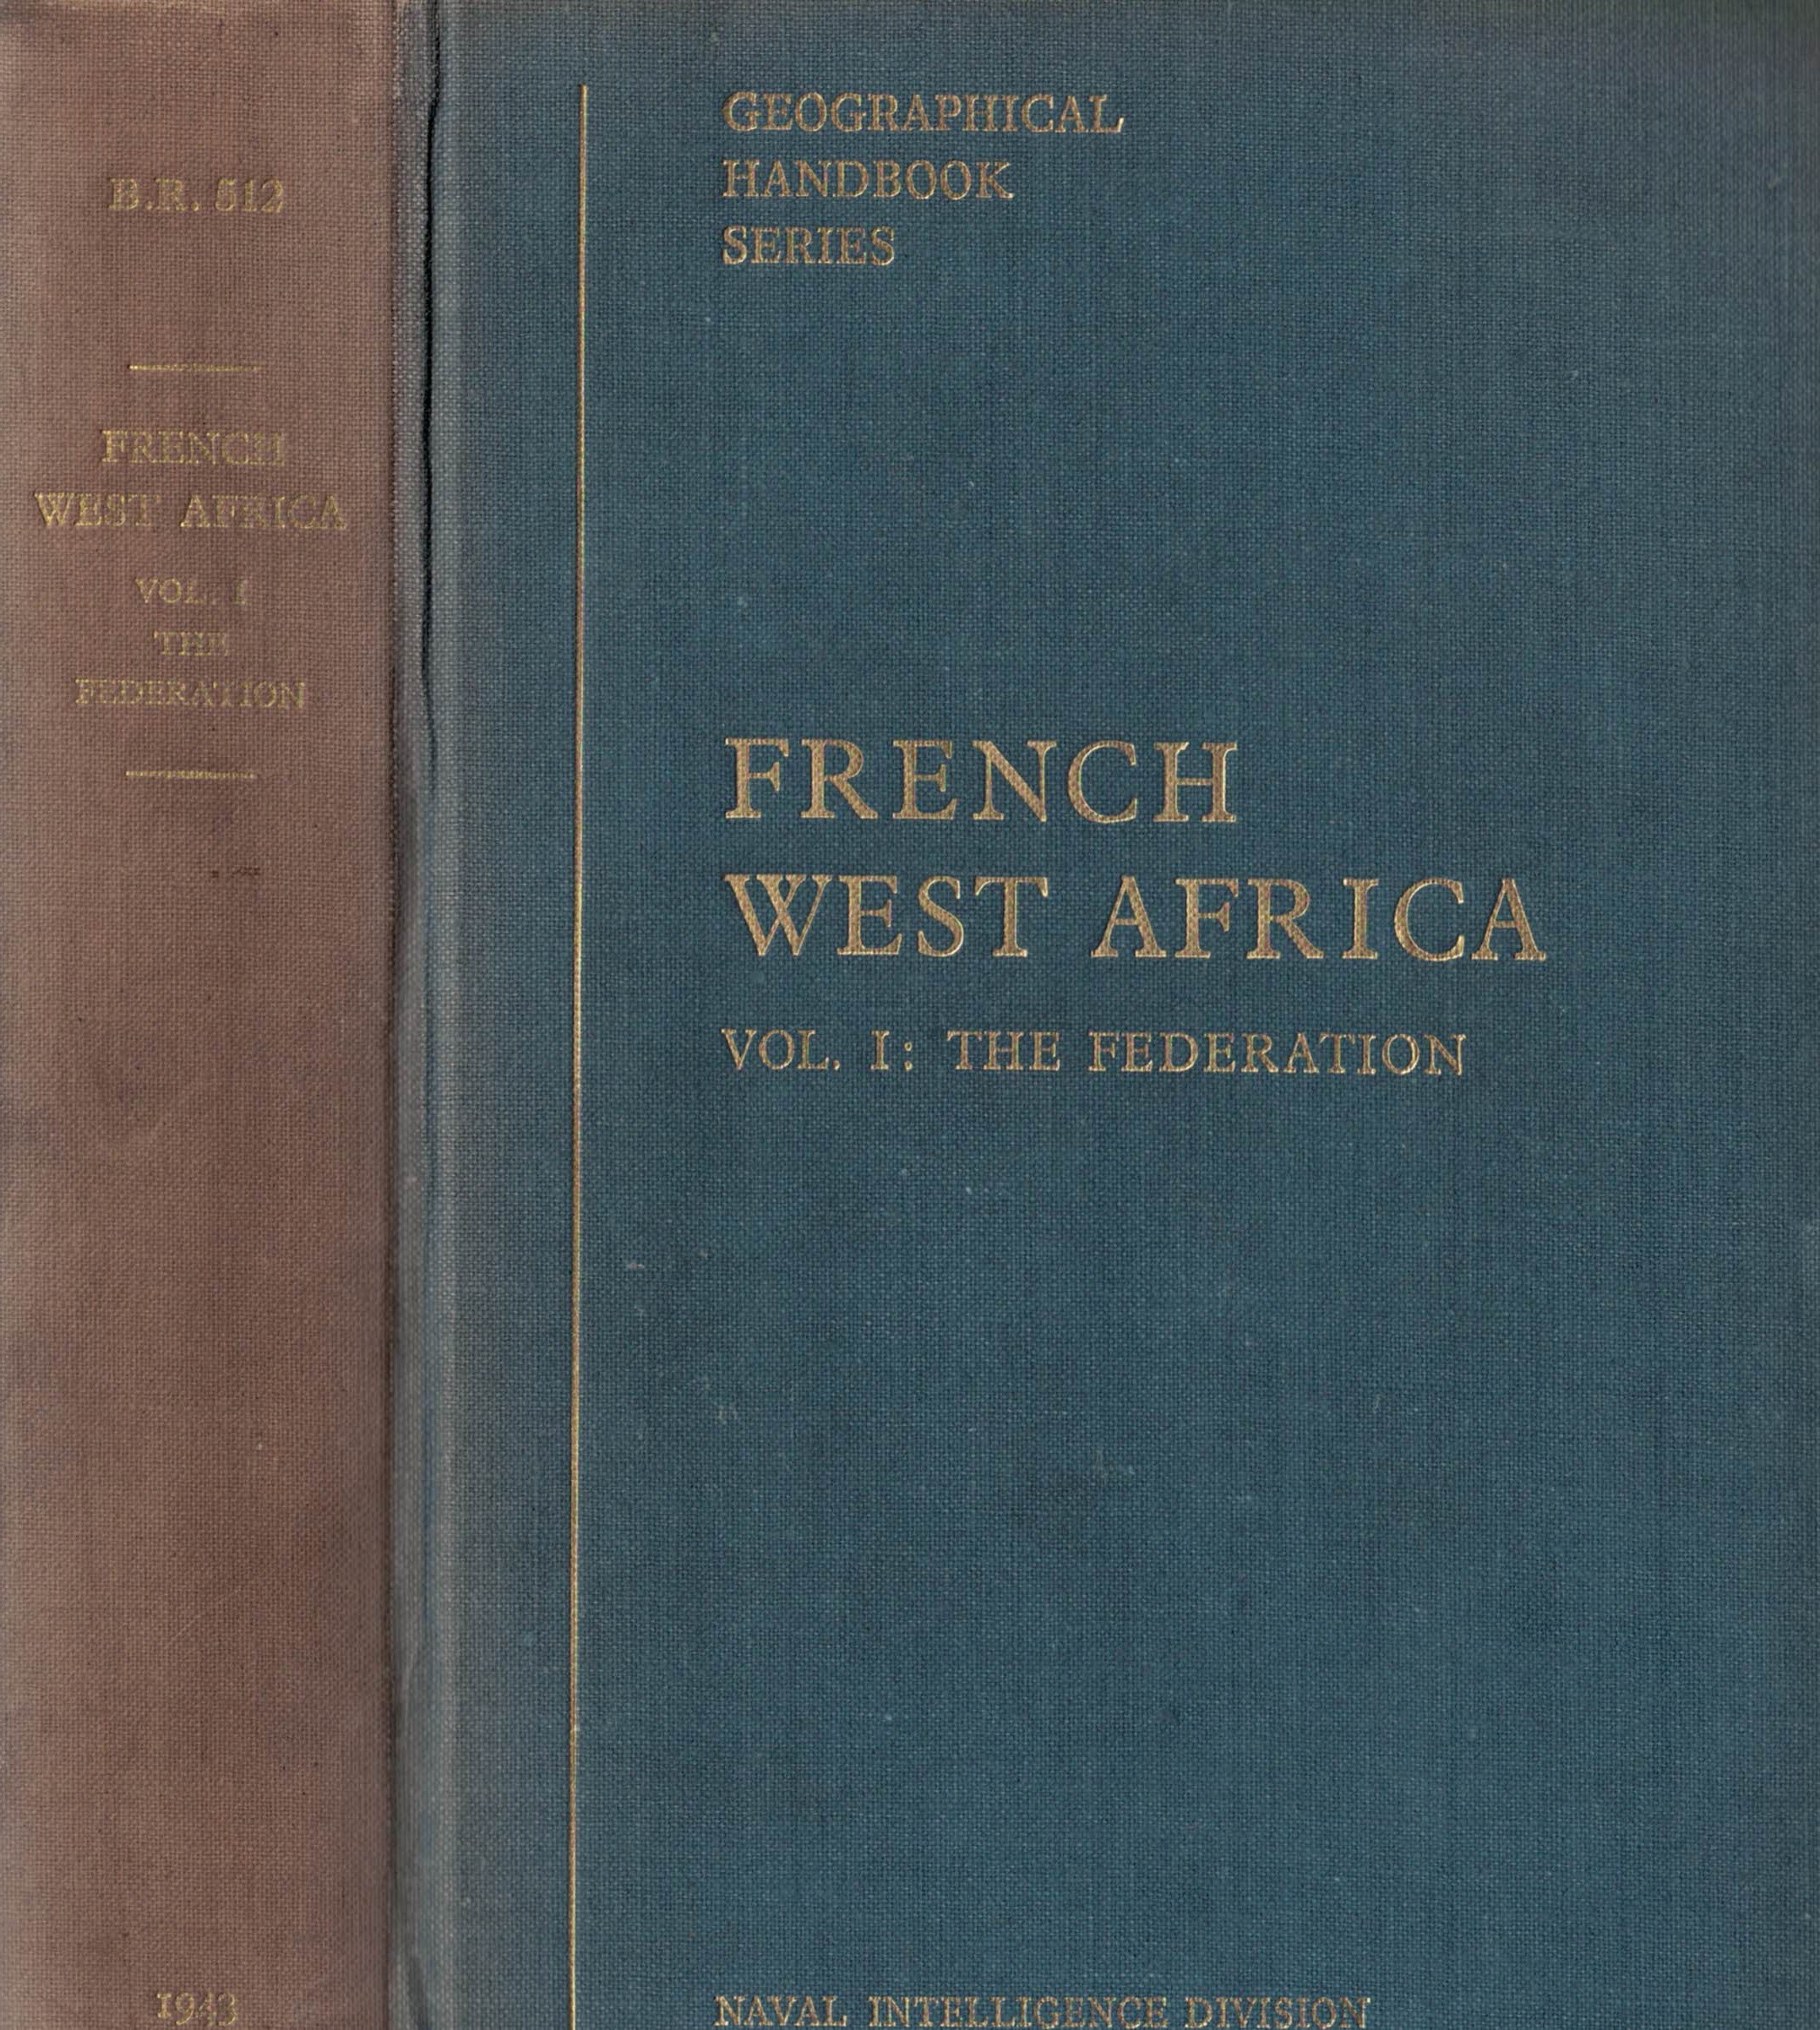 French West Africa.  Volume I. The Federation. Geographical Handbook Series.